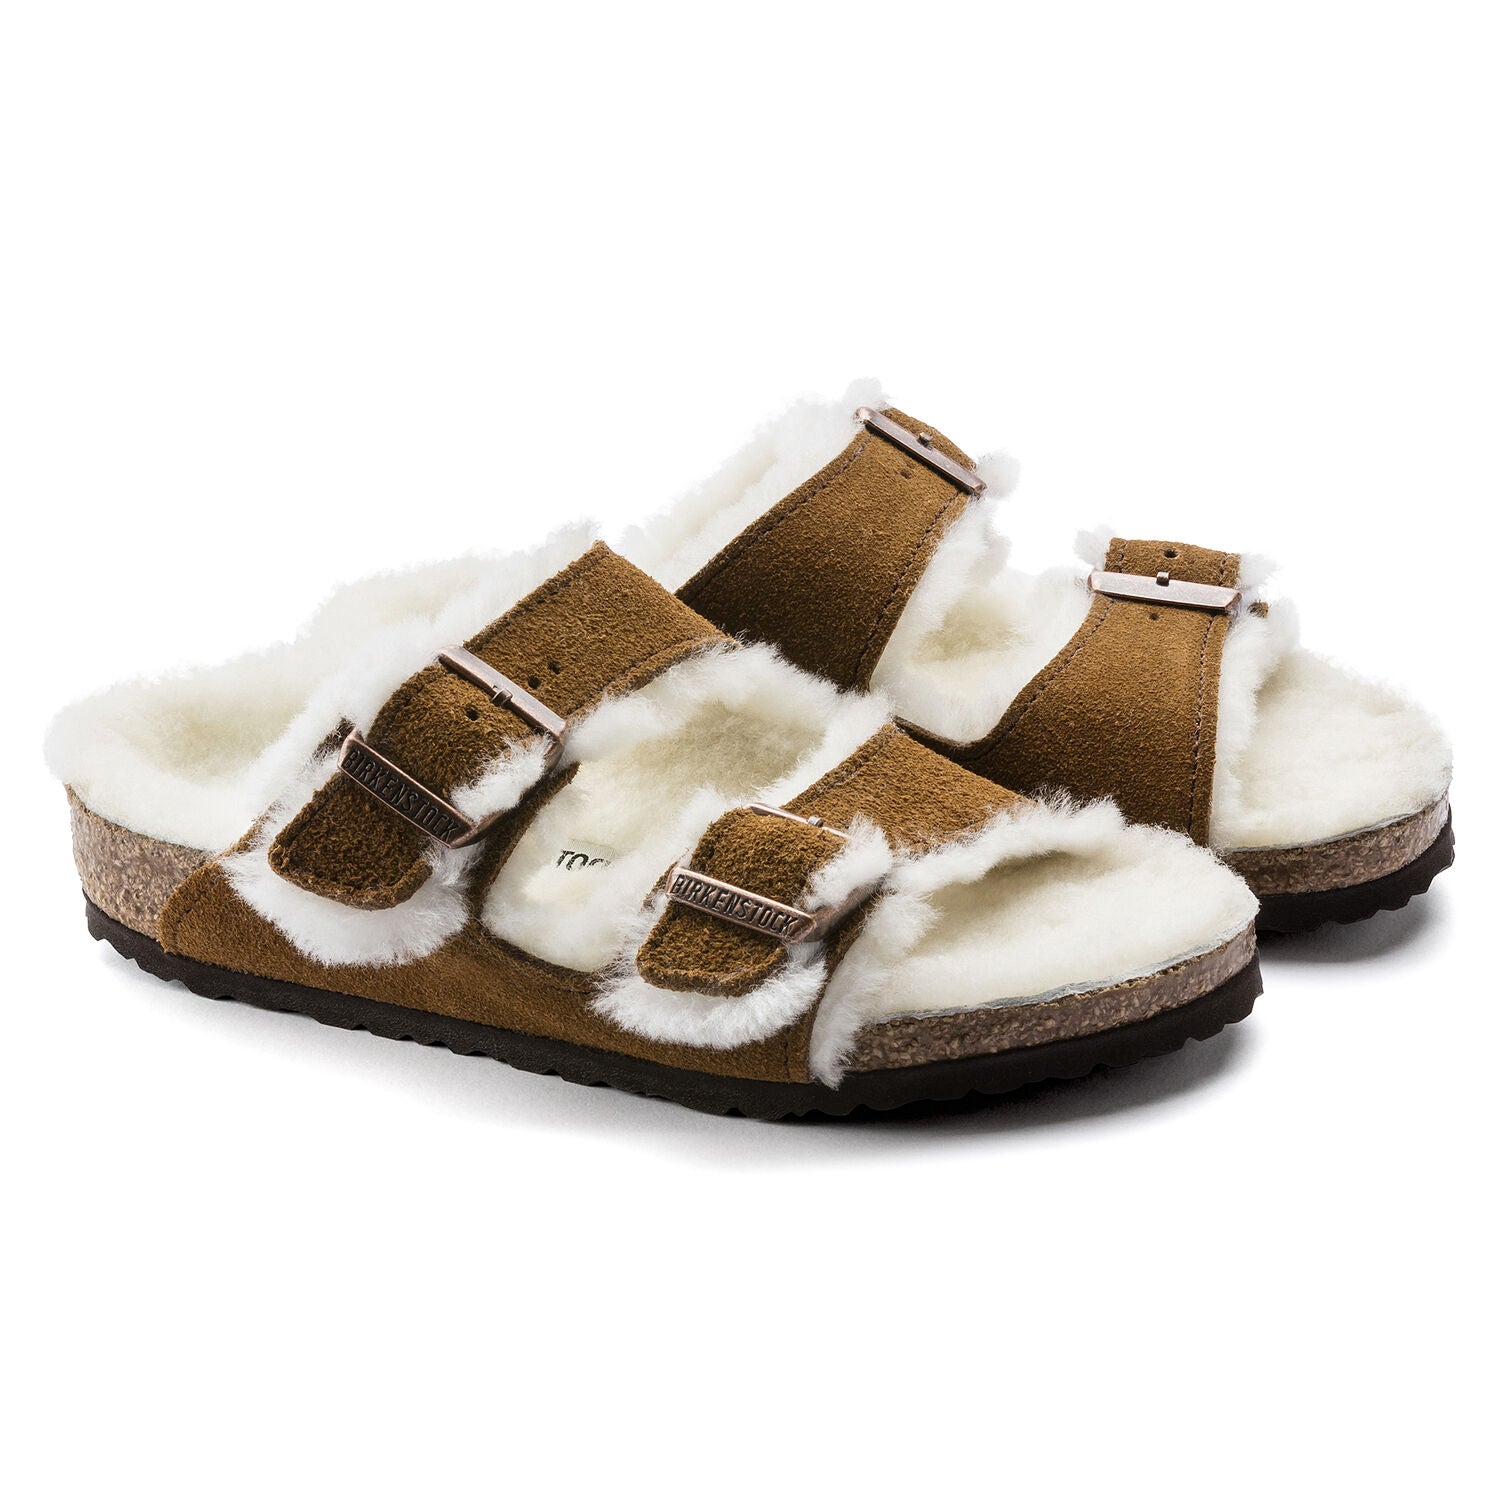 Adult Arizona Shearling Suede Leather Slipper - Mink